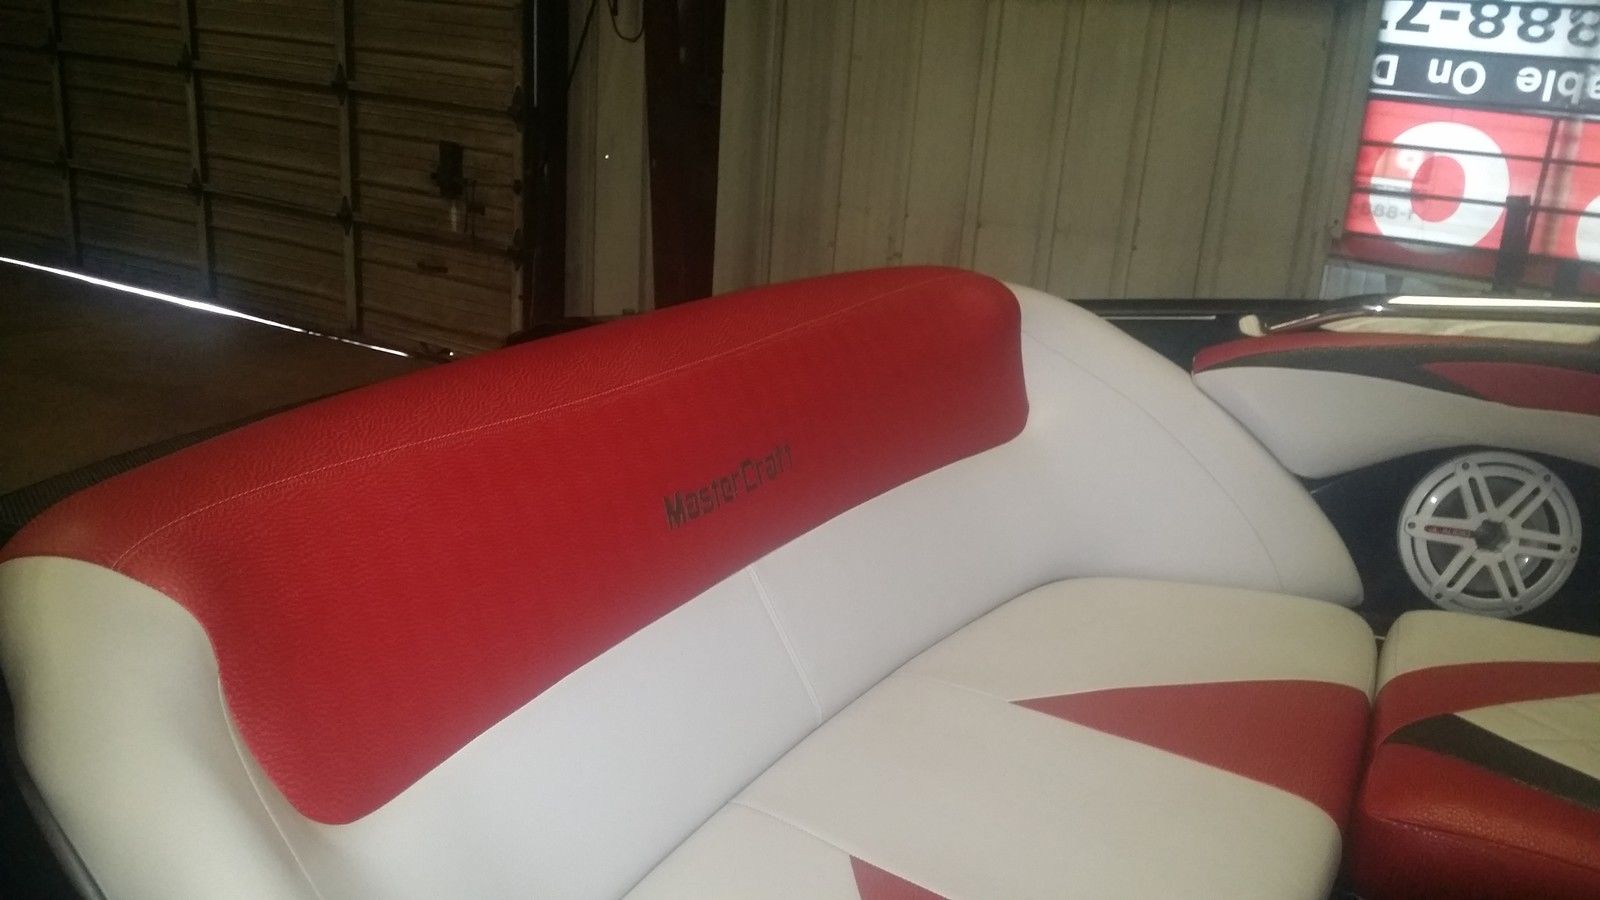 Mastercraft X-2 boat for sale from USA